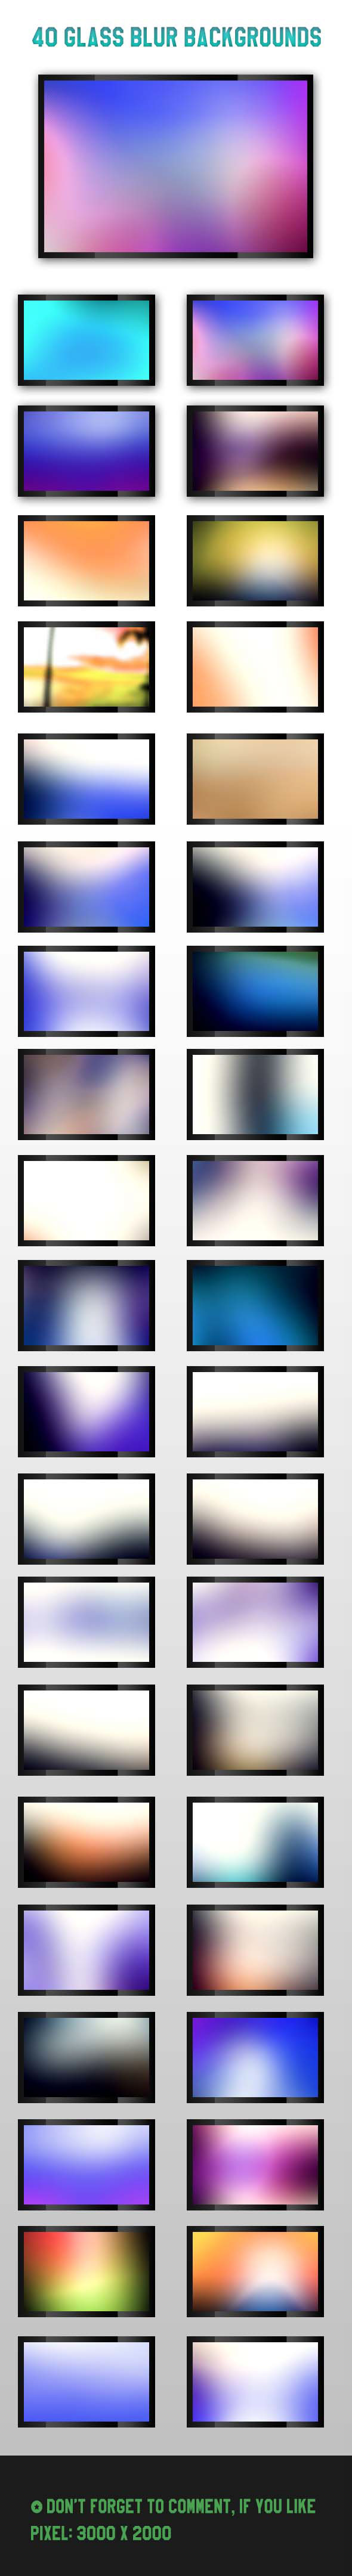 abstract abstract background backgrounds blur blur backgrounds Blurry business clean color colorful creative Creativity cyan